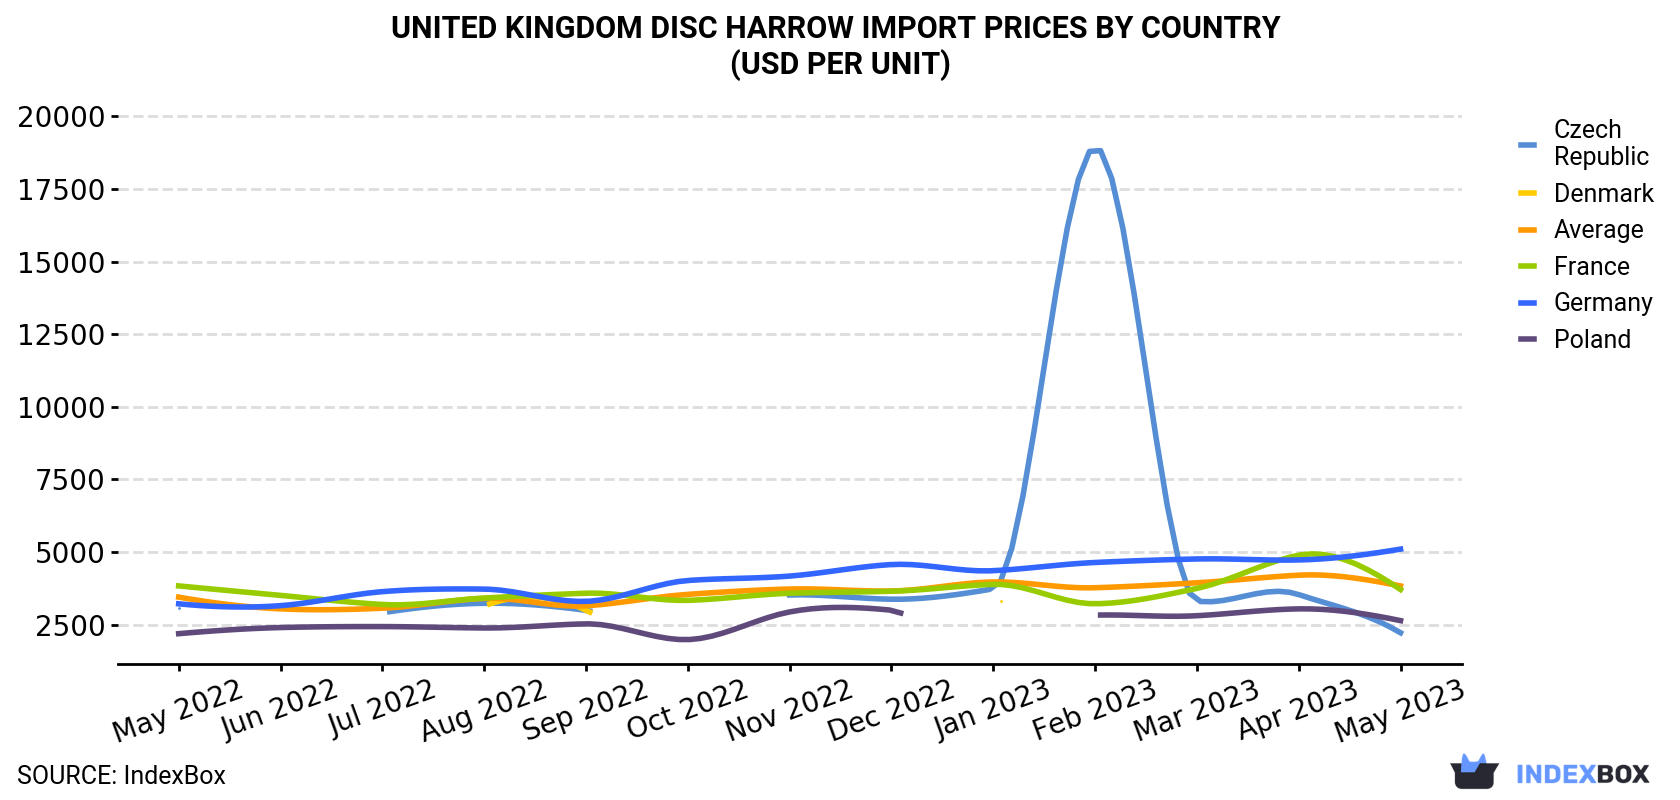 United Kingdom Disc Harrow Import Prices By Country (USD Per Unit)